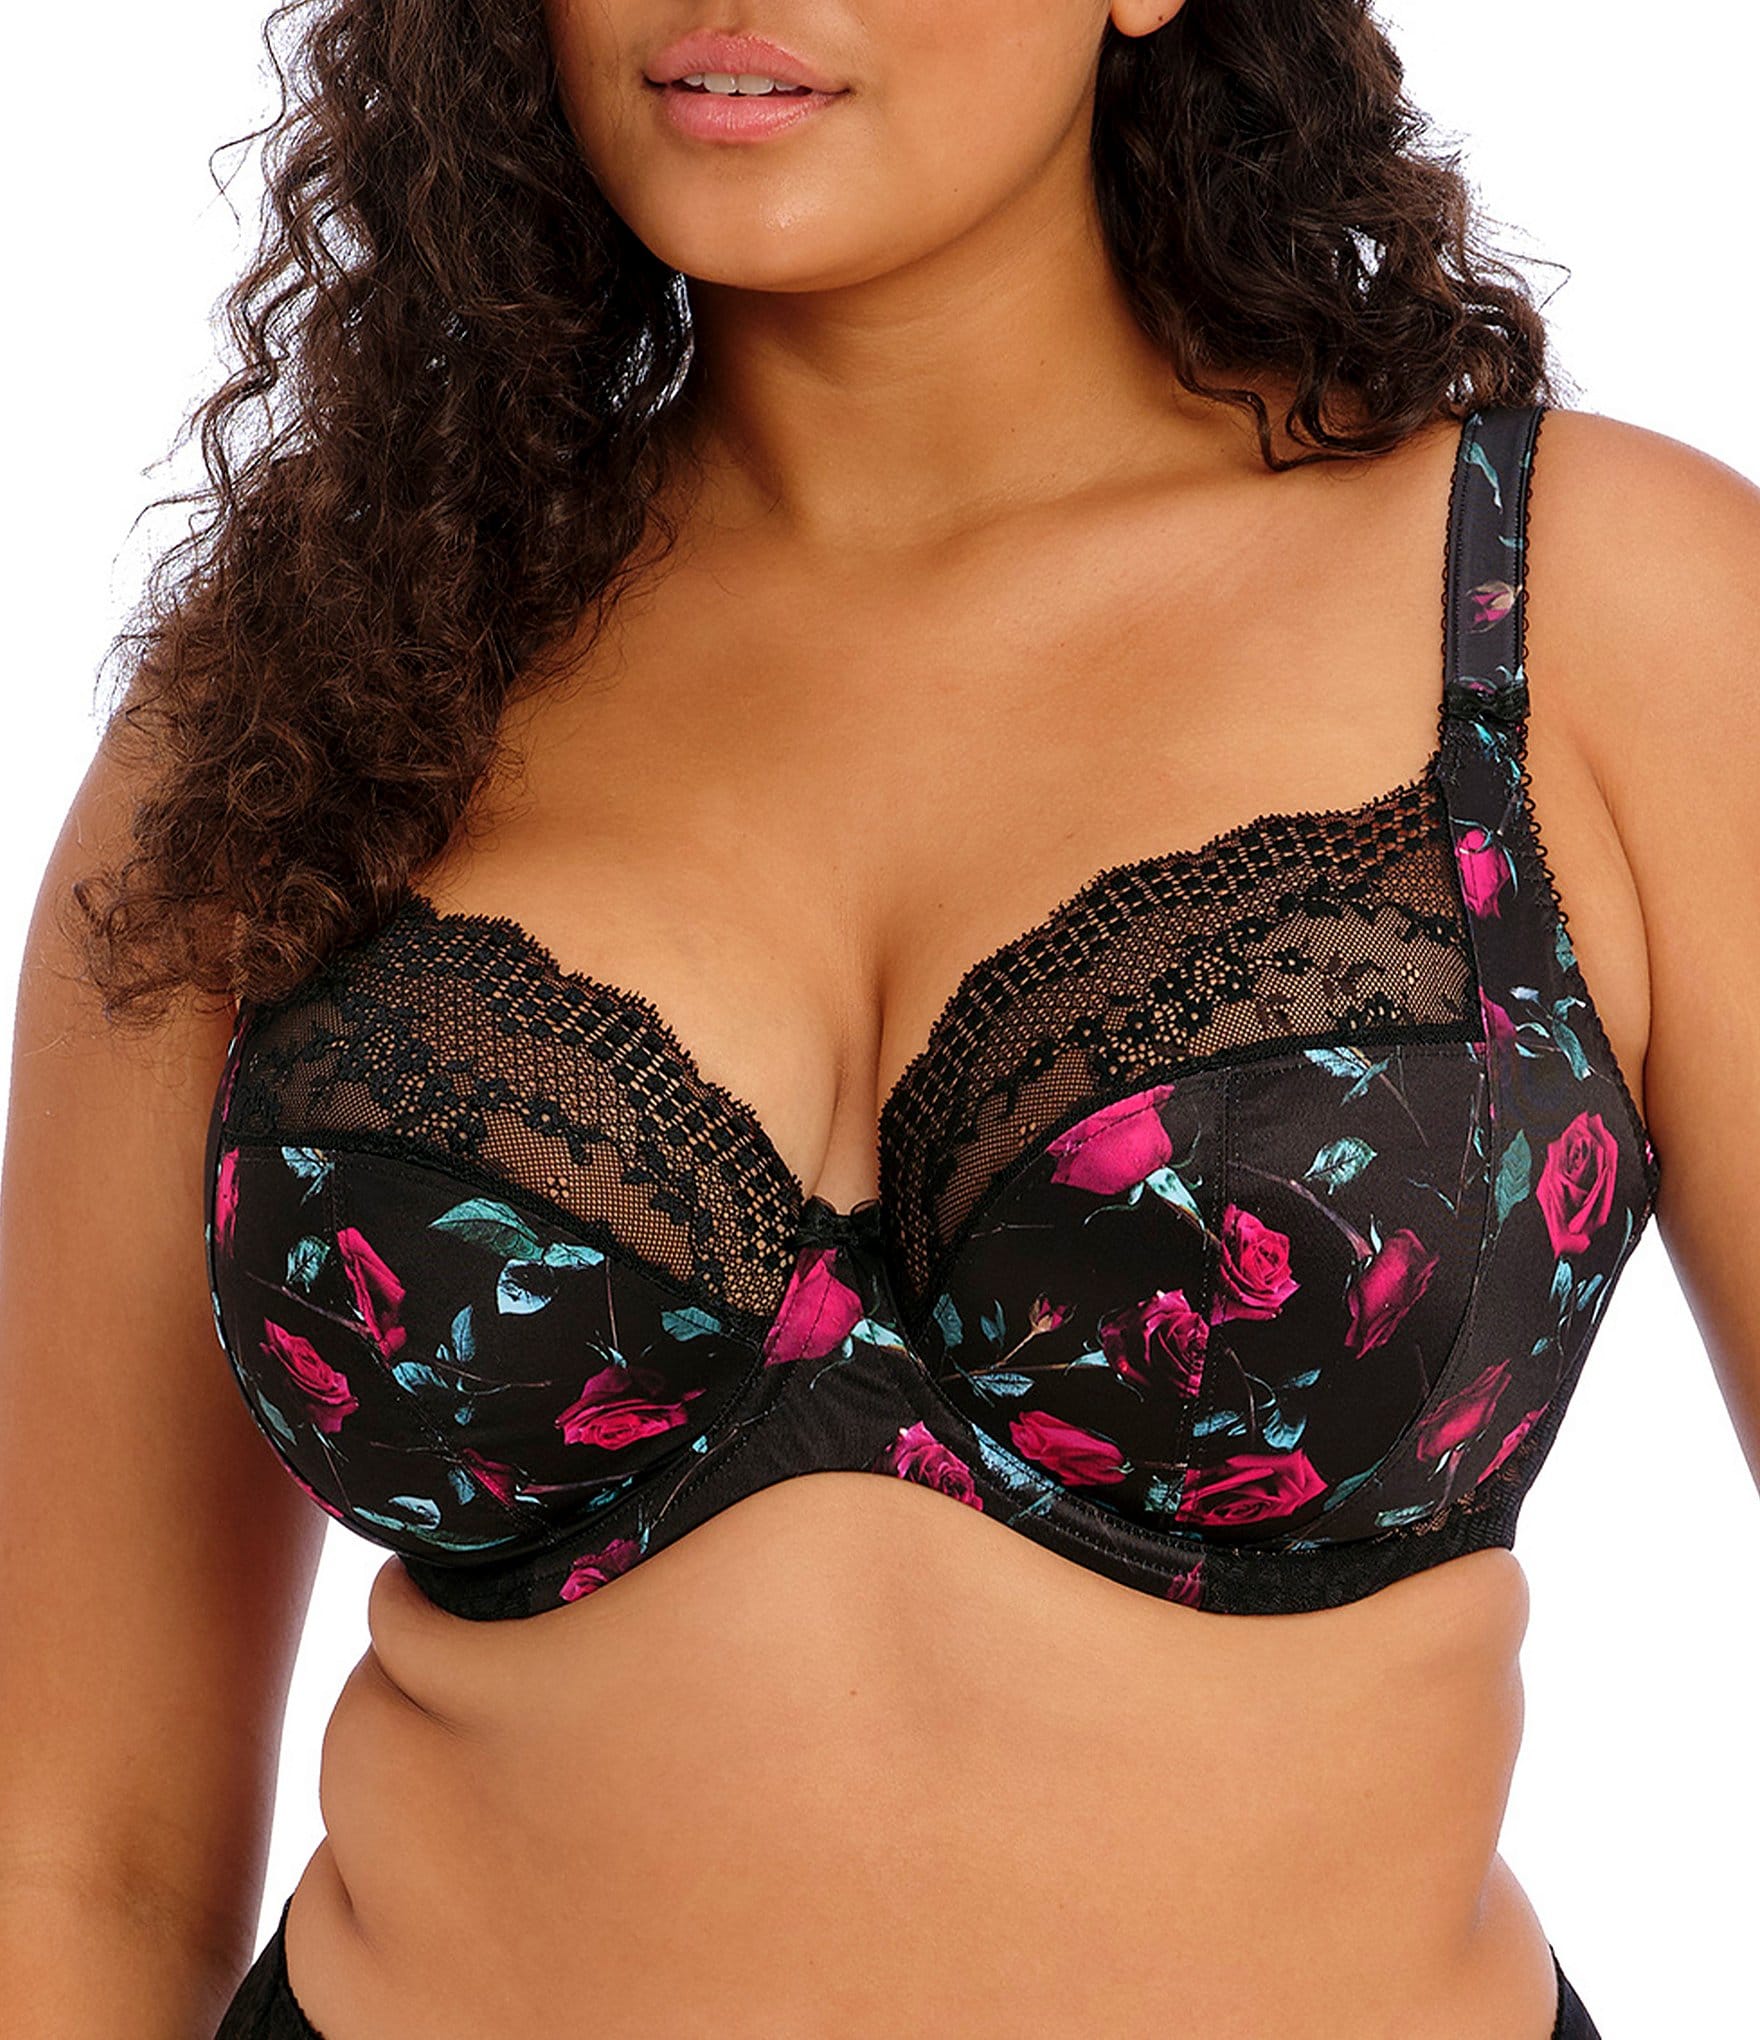 TELIMUSSTO Women's Sexy Floral Lace Bra Plus Size Lingerie Full